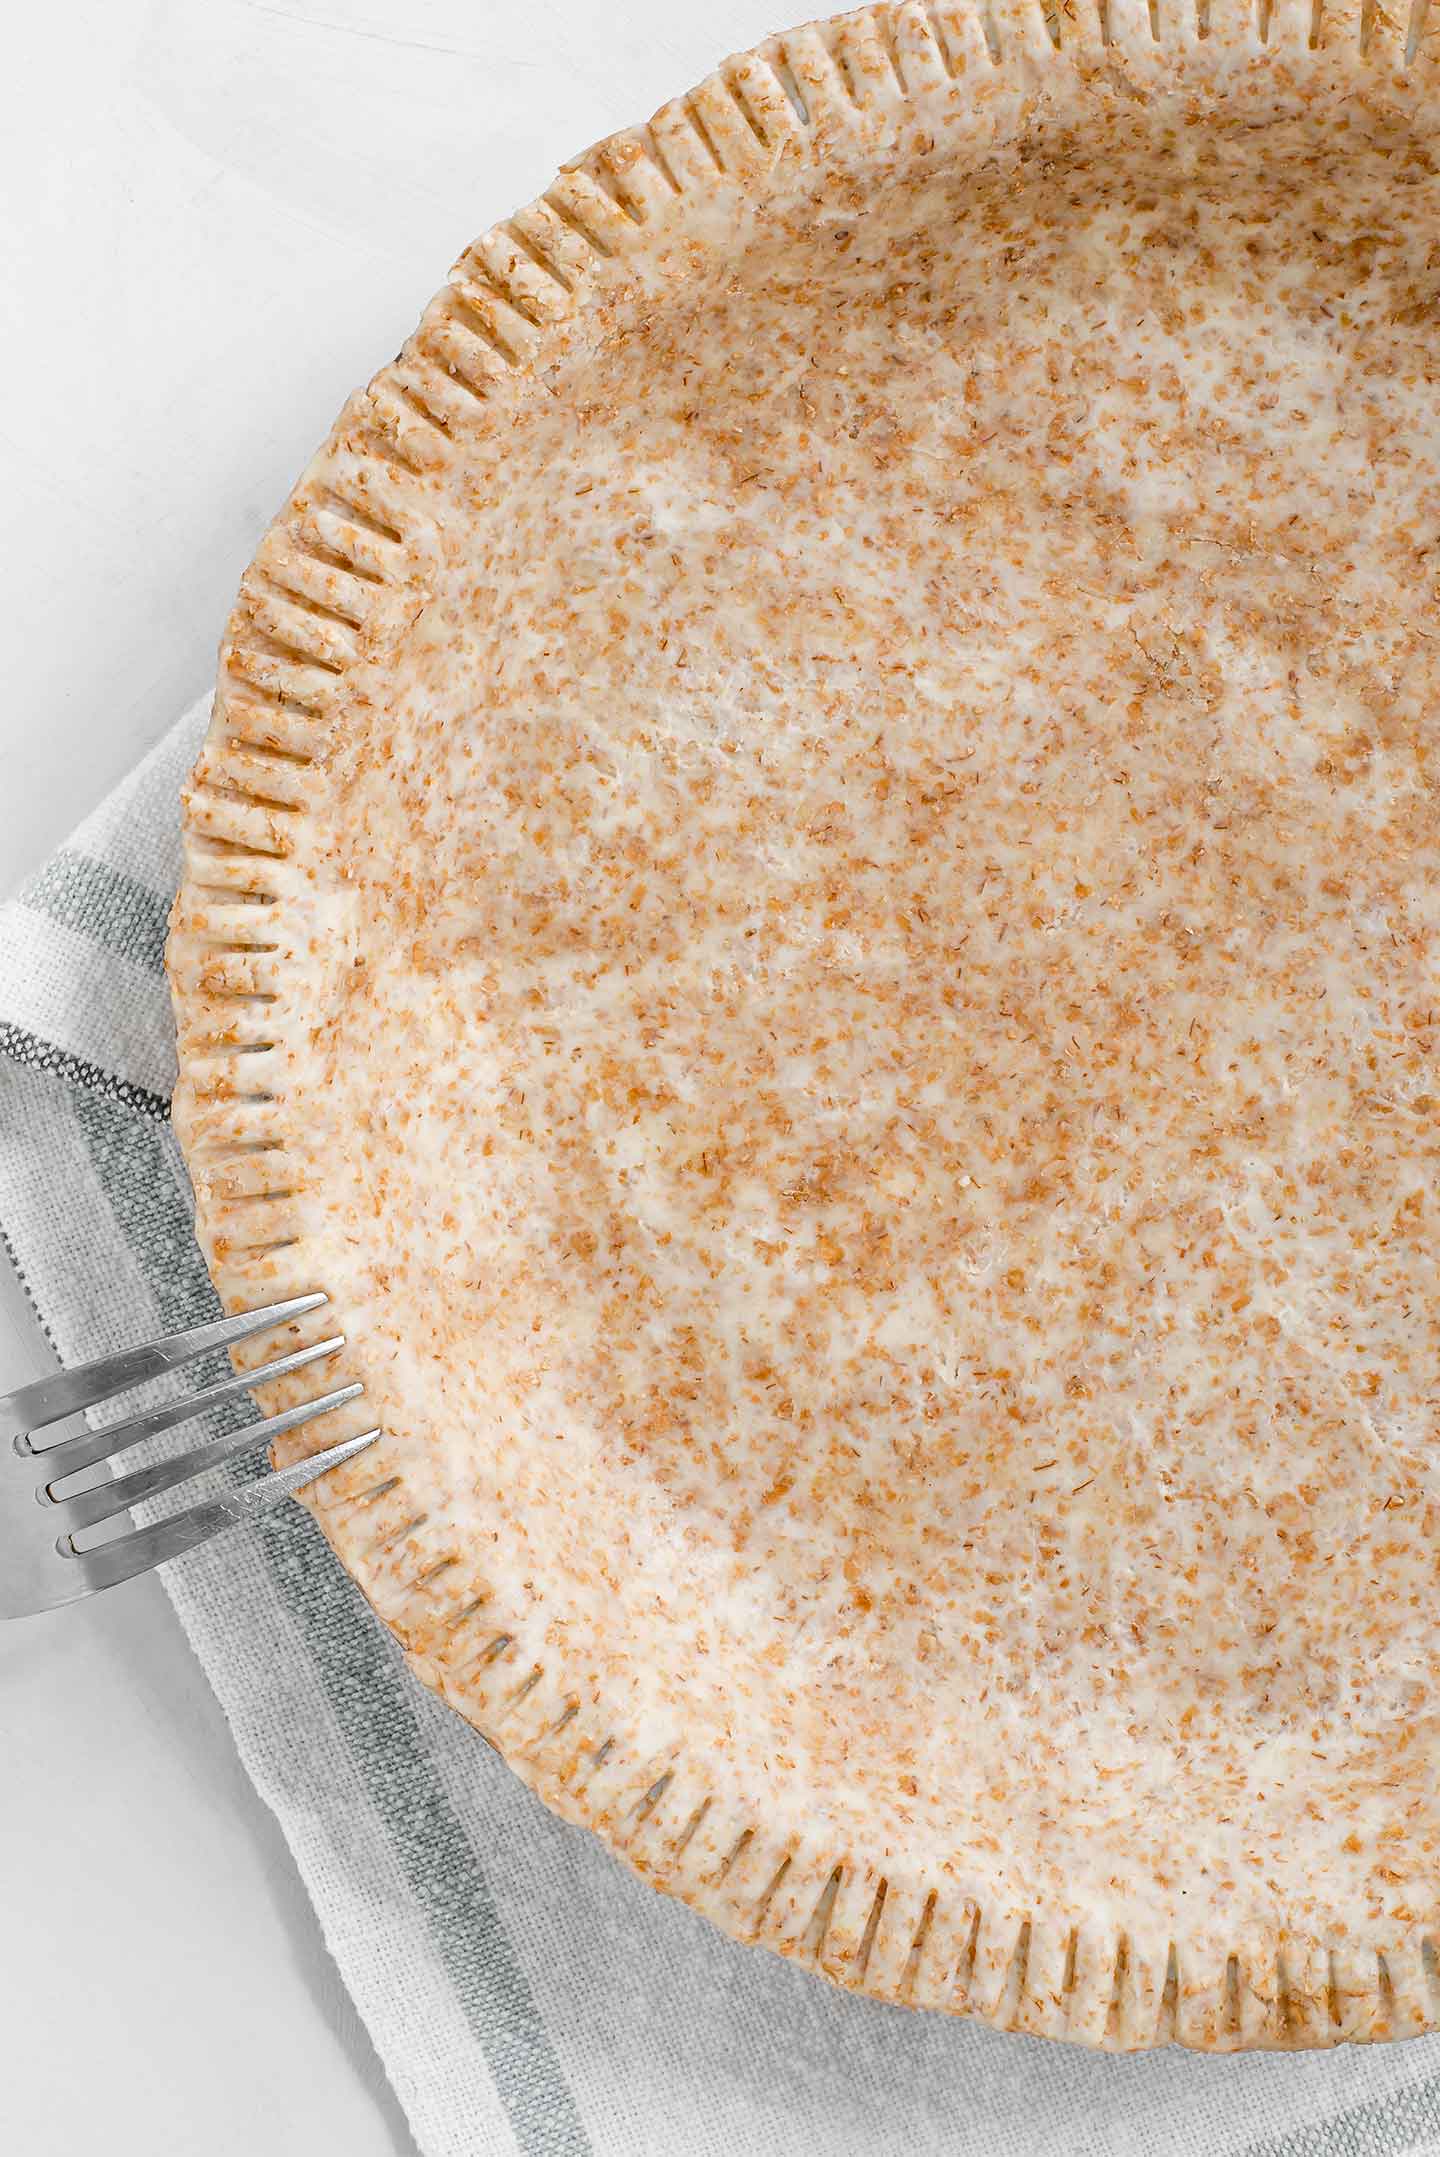 Top down view of an unbaked homemade whole wheat crust in a pie plate. A fork crimps the edges.